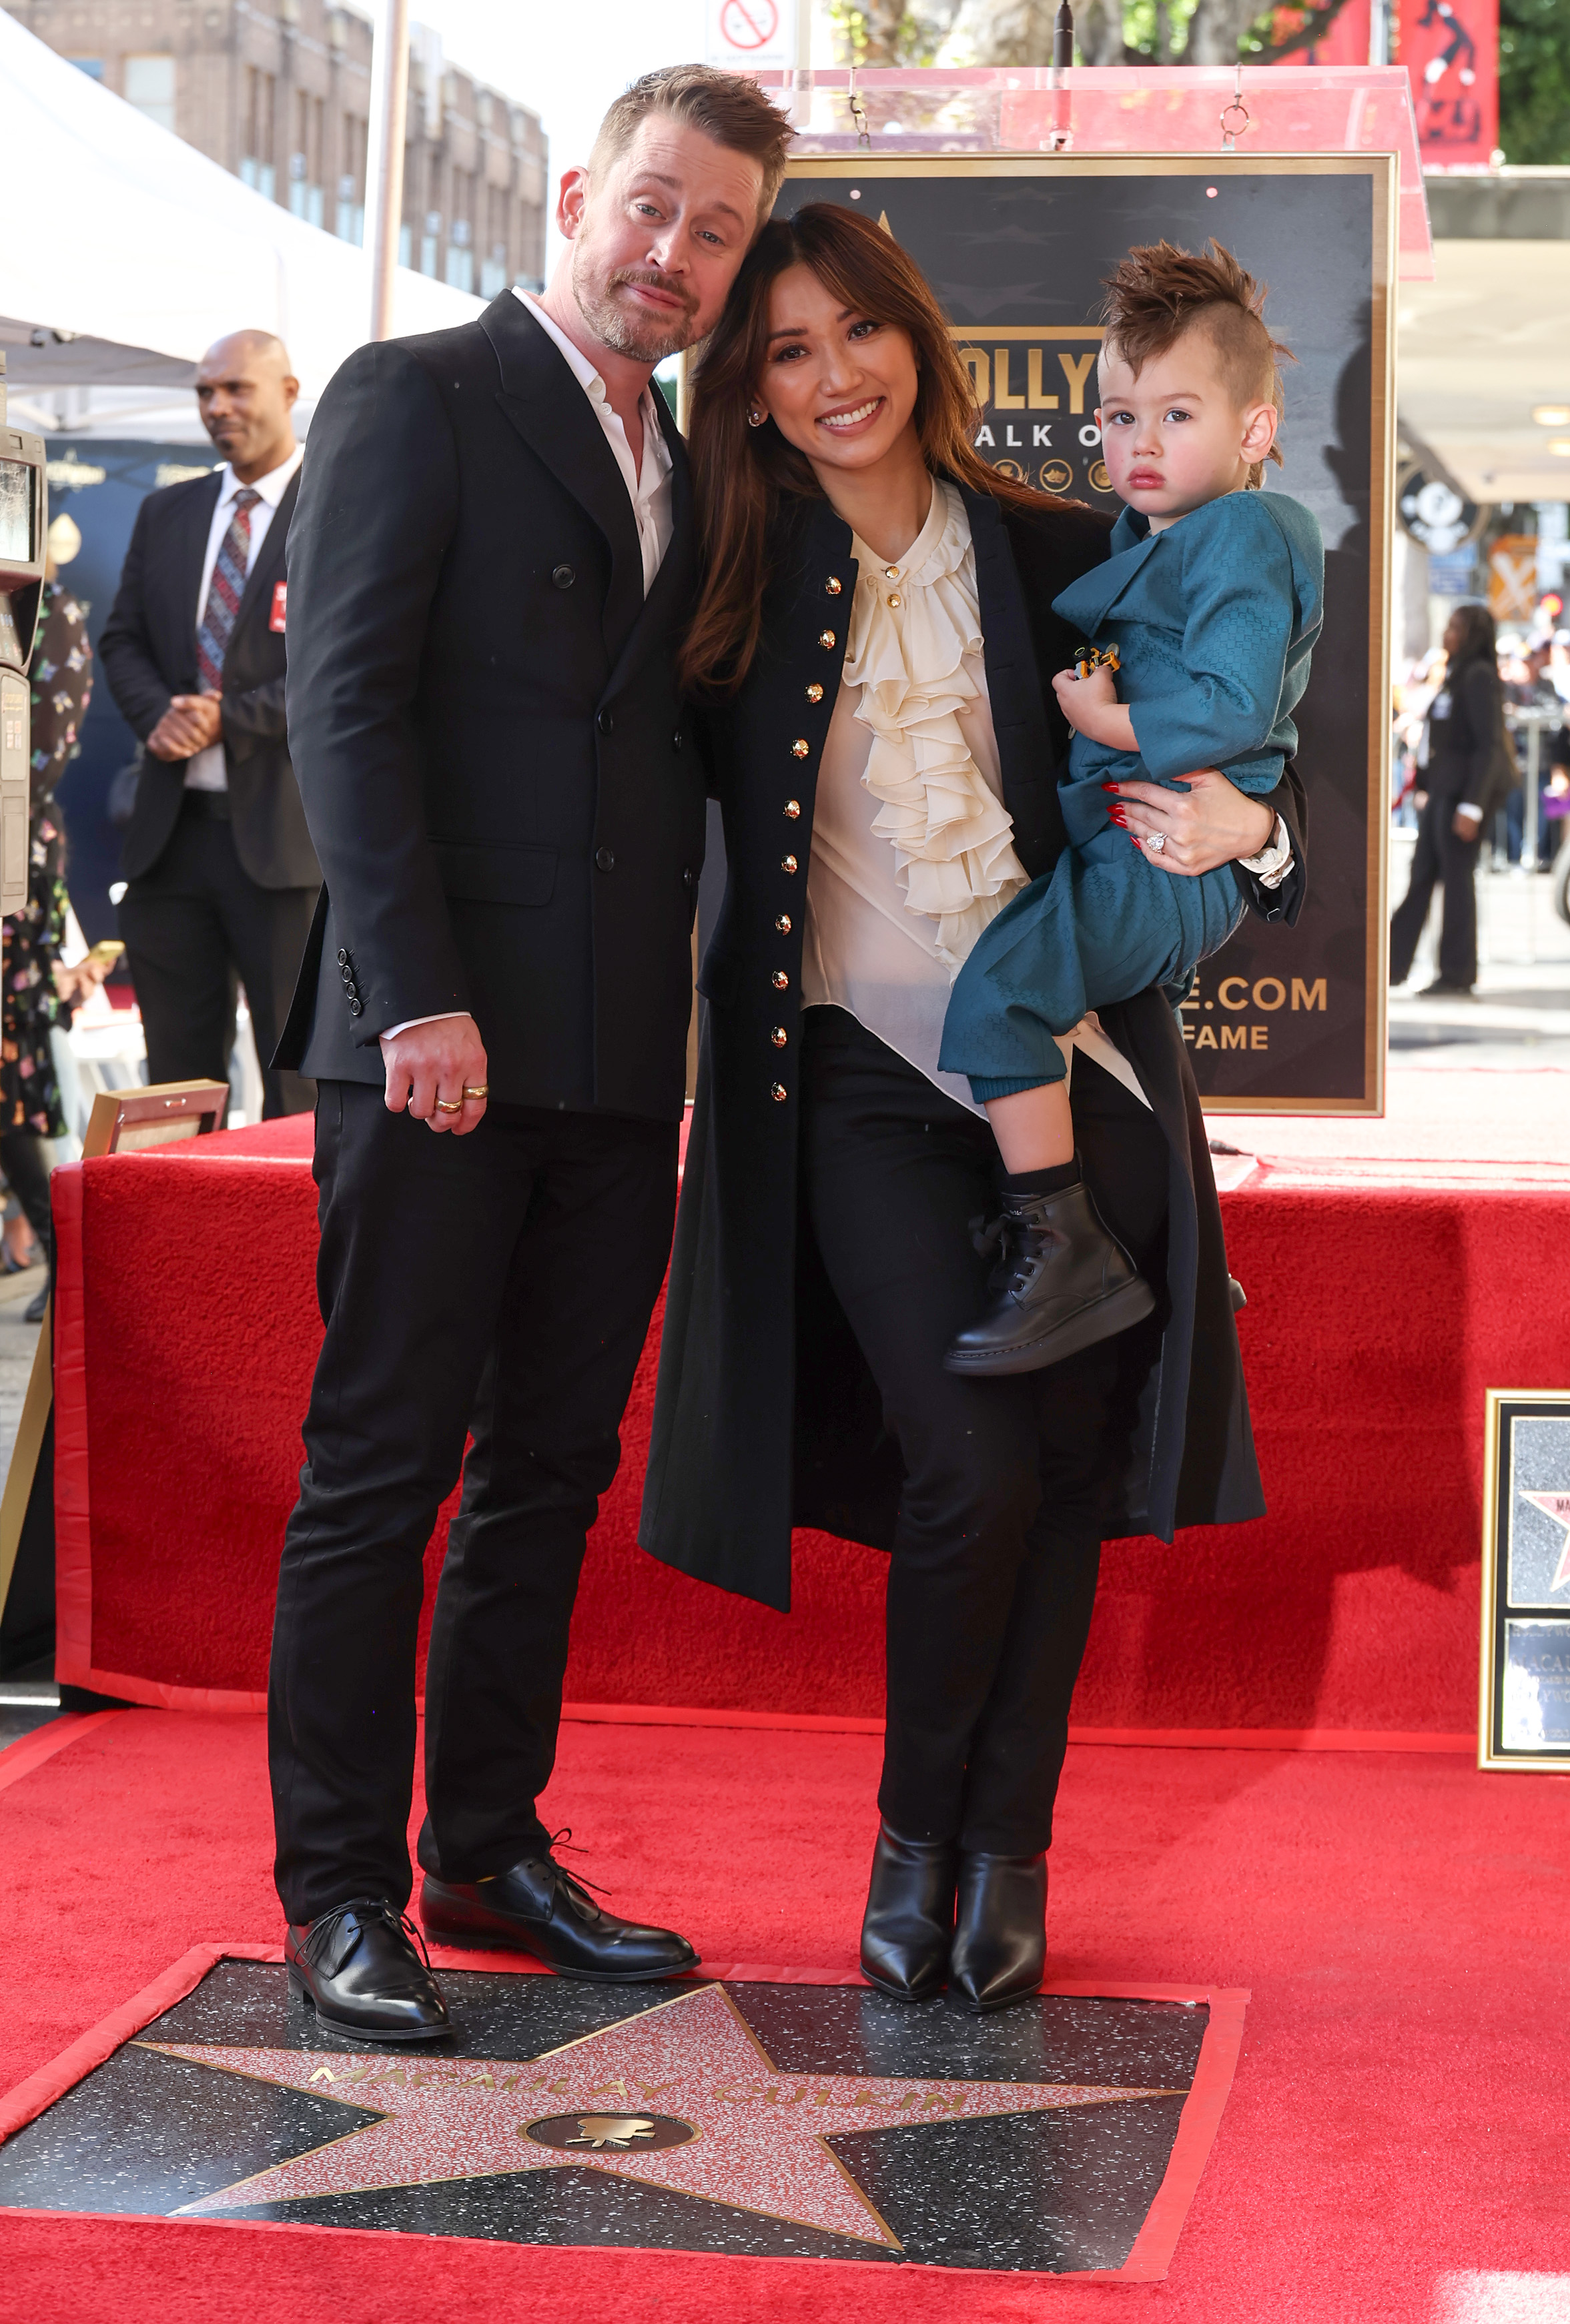 Brenda Song made a rare public appearance with her fiancé, Macaulay Culkin, and their son, at the Home Alone actor's Hollywood Walk of Fame Ceremony in 2023